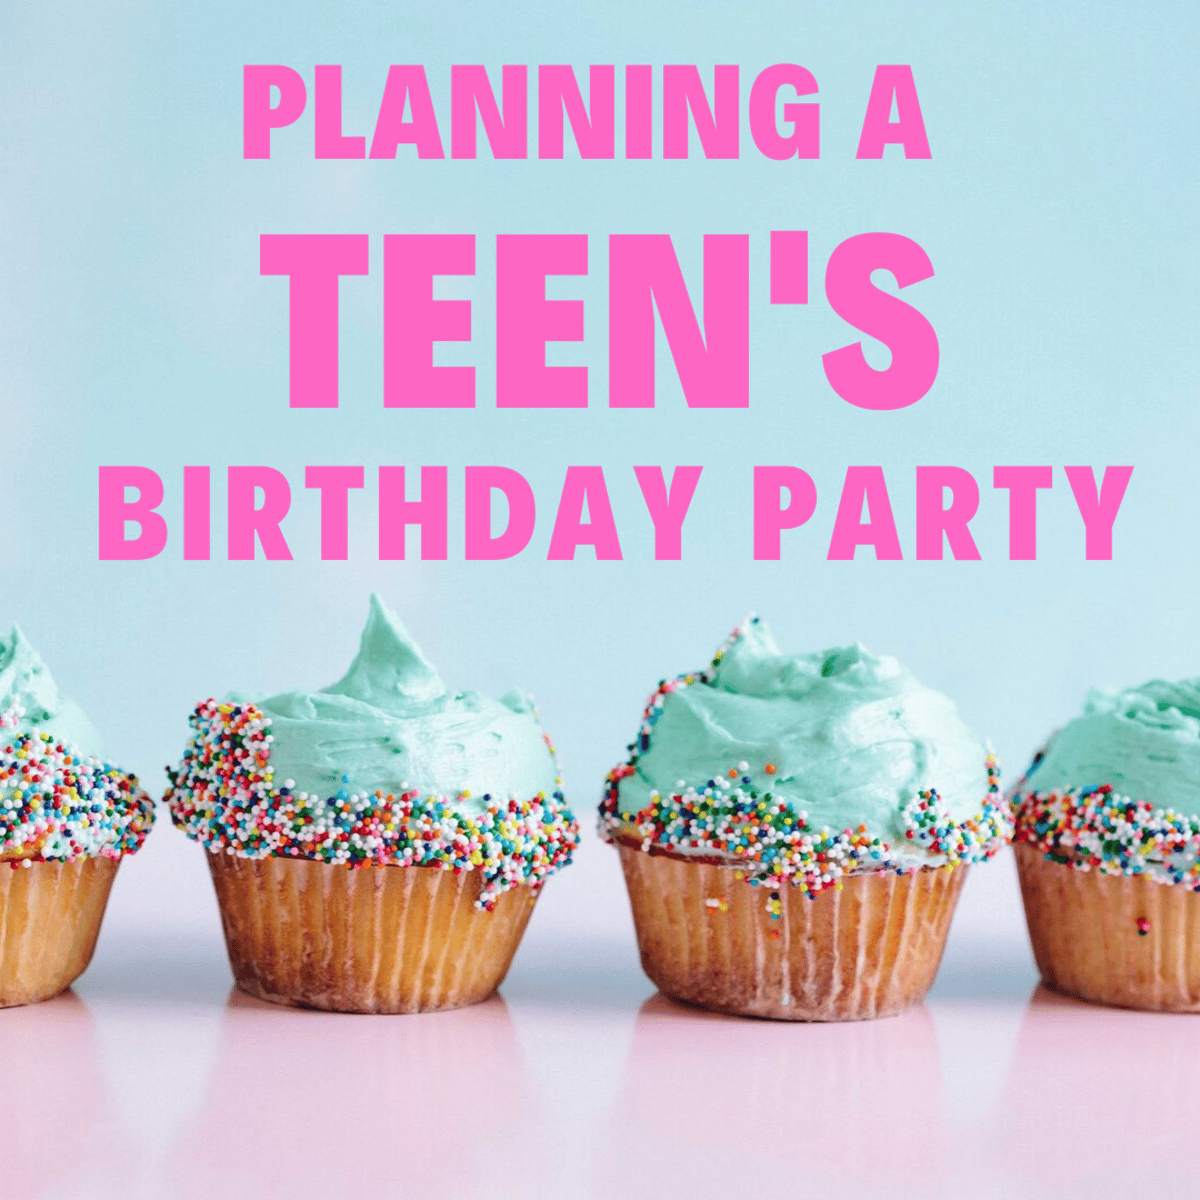 How to Celebrate a Teenager